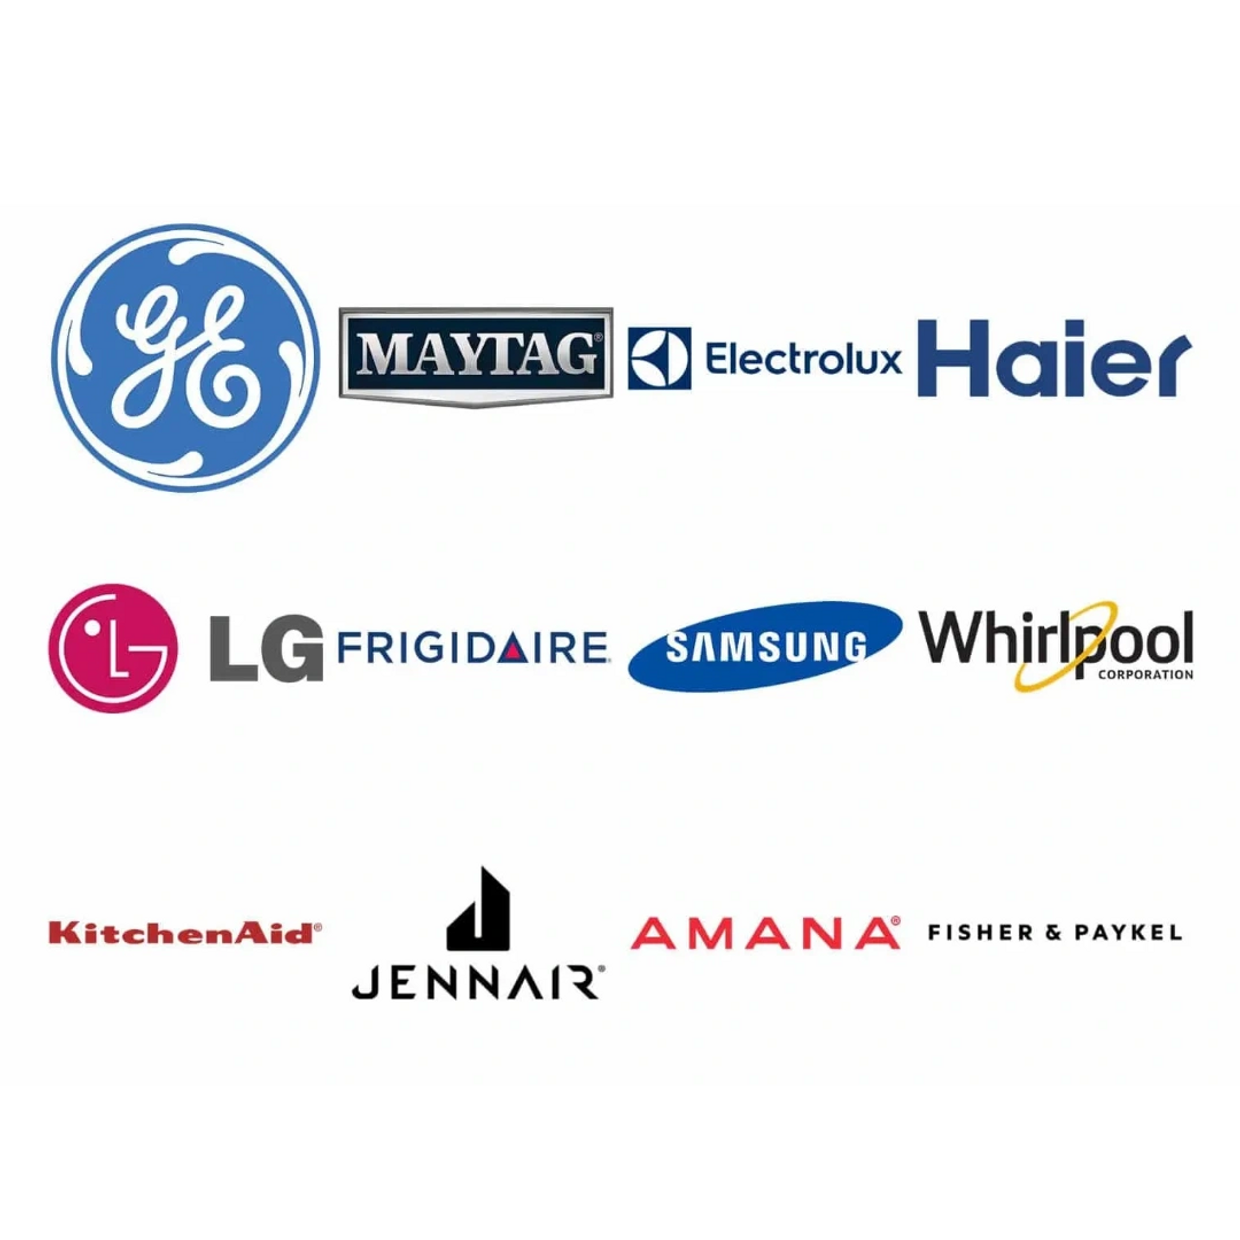 All the brands we cover and some